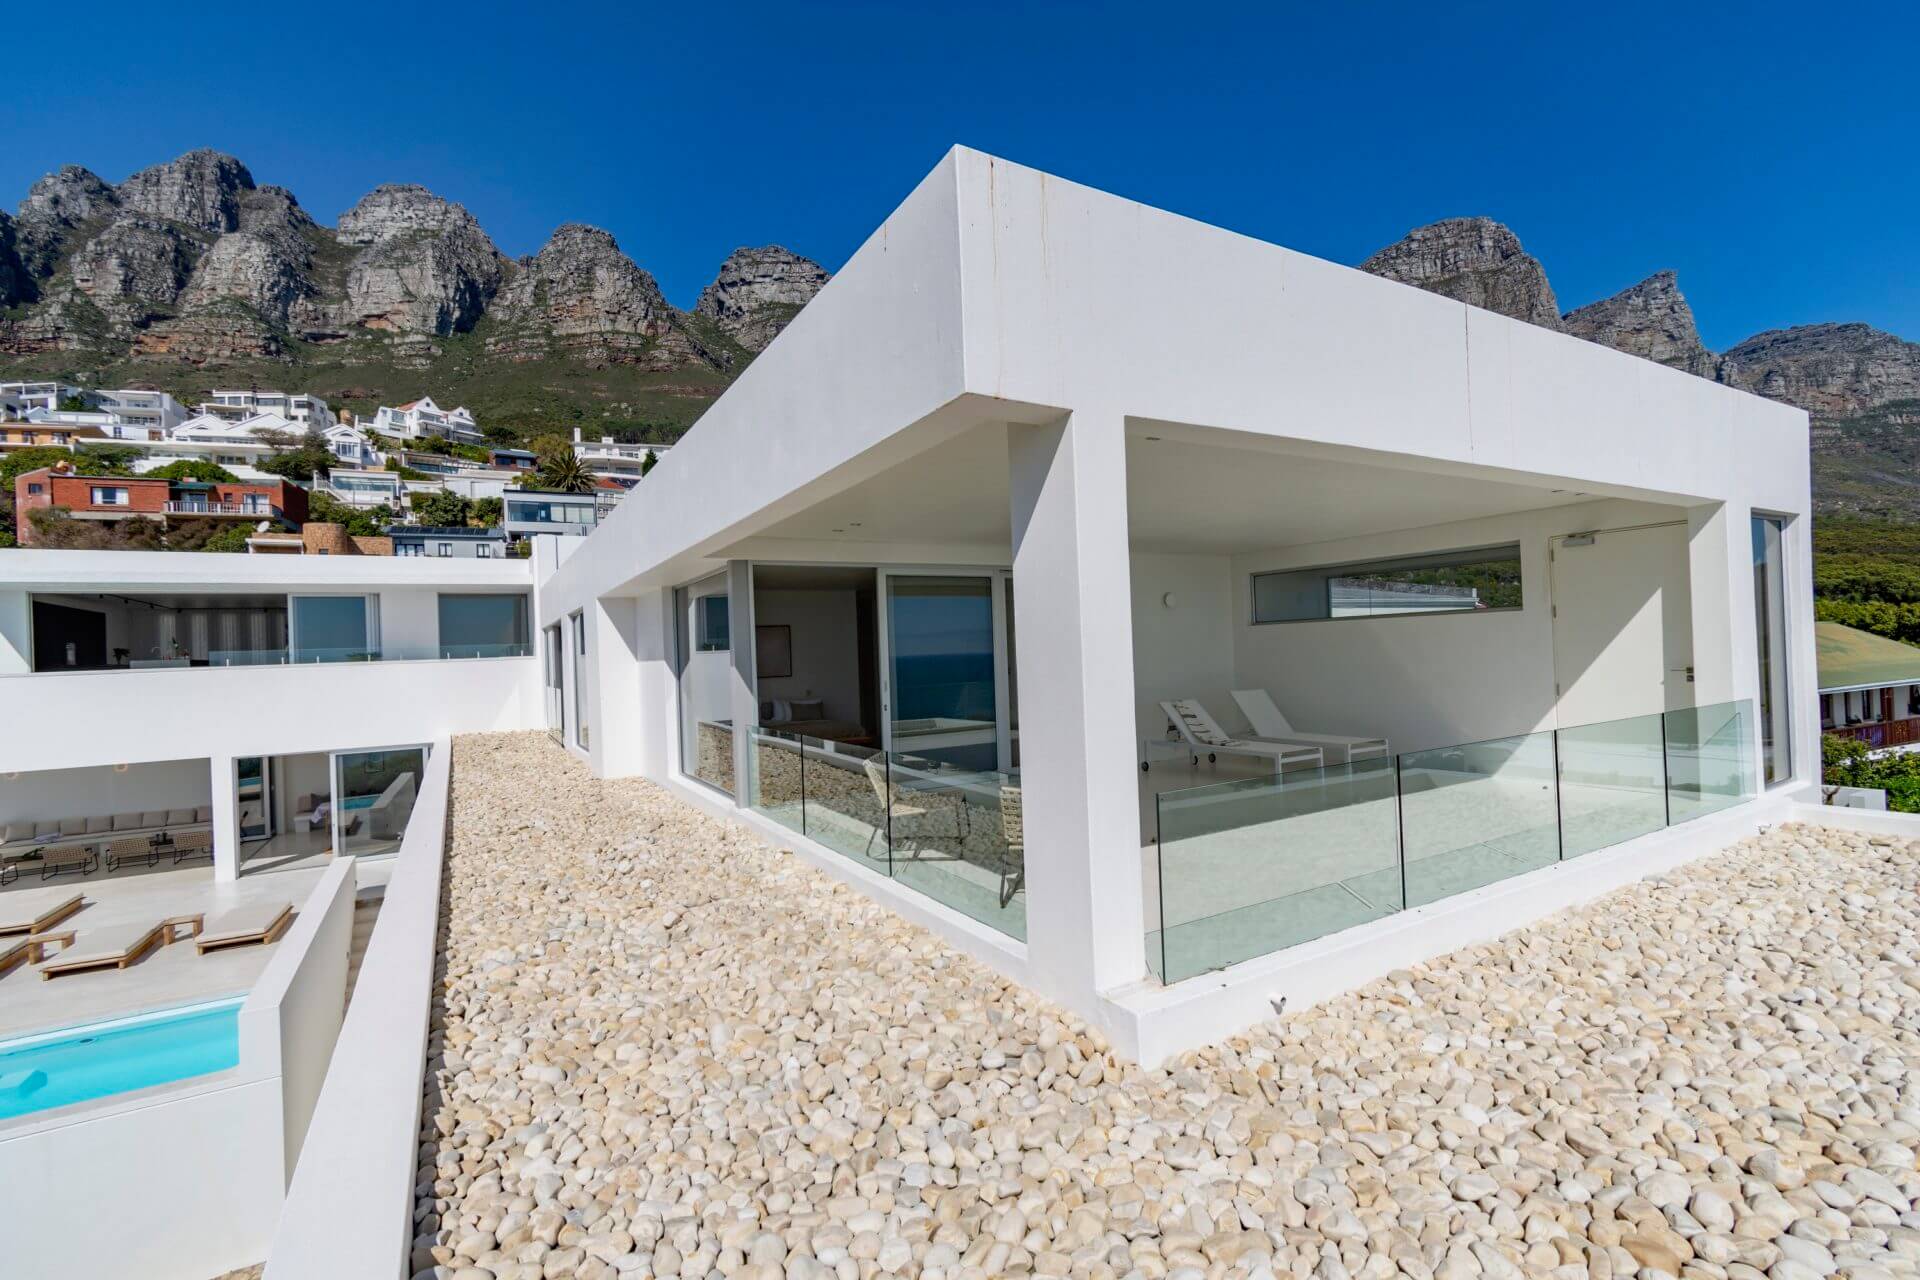 Photo 54 of Villa Ibiza accommodation in Camps Bay, Cape Town with 8 bedrooms and 8 bathrooms